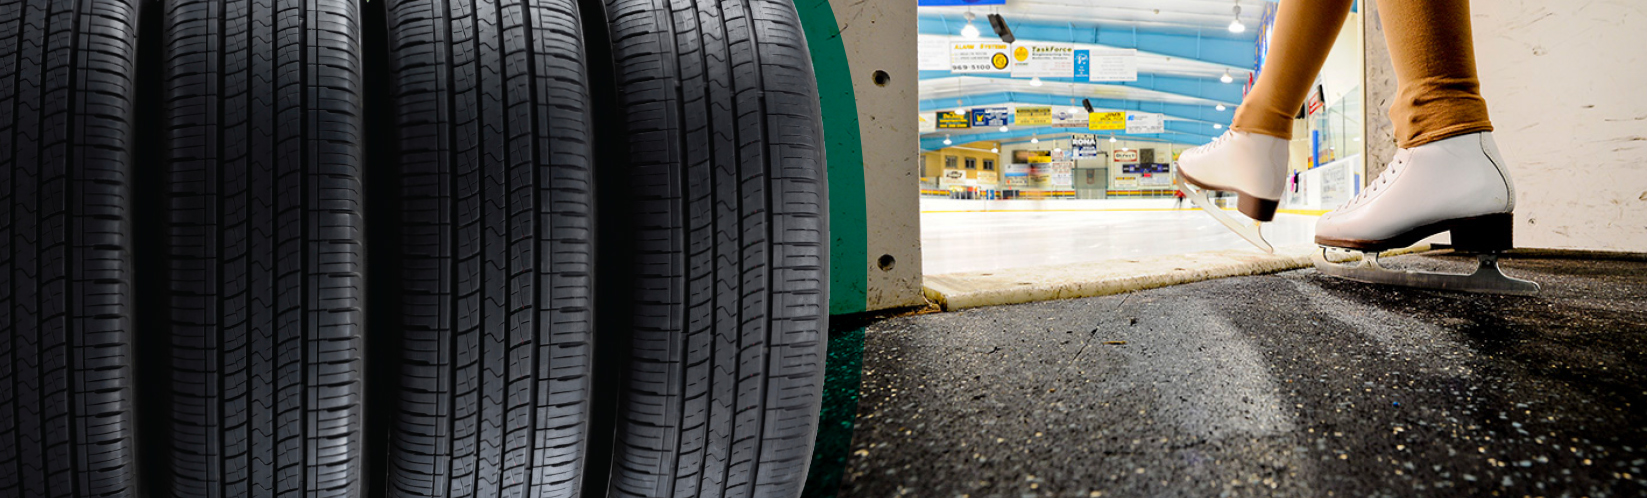 Rethink Tires :: Ontario Tire Recycling